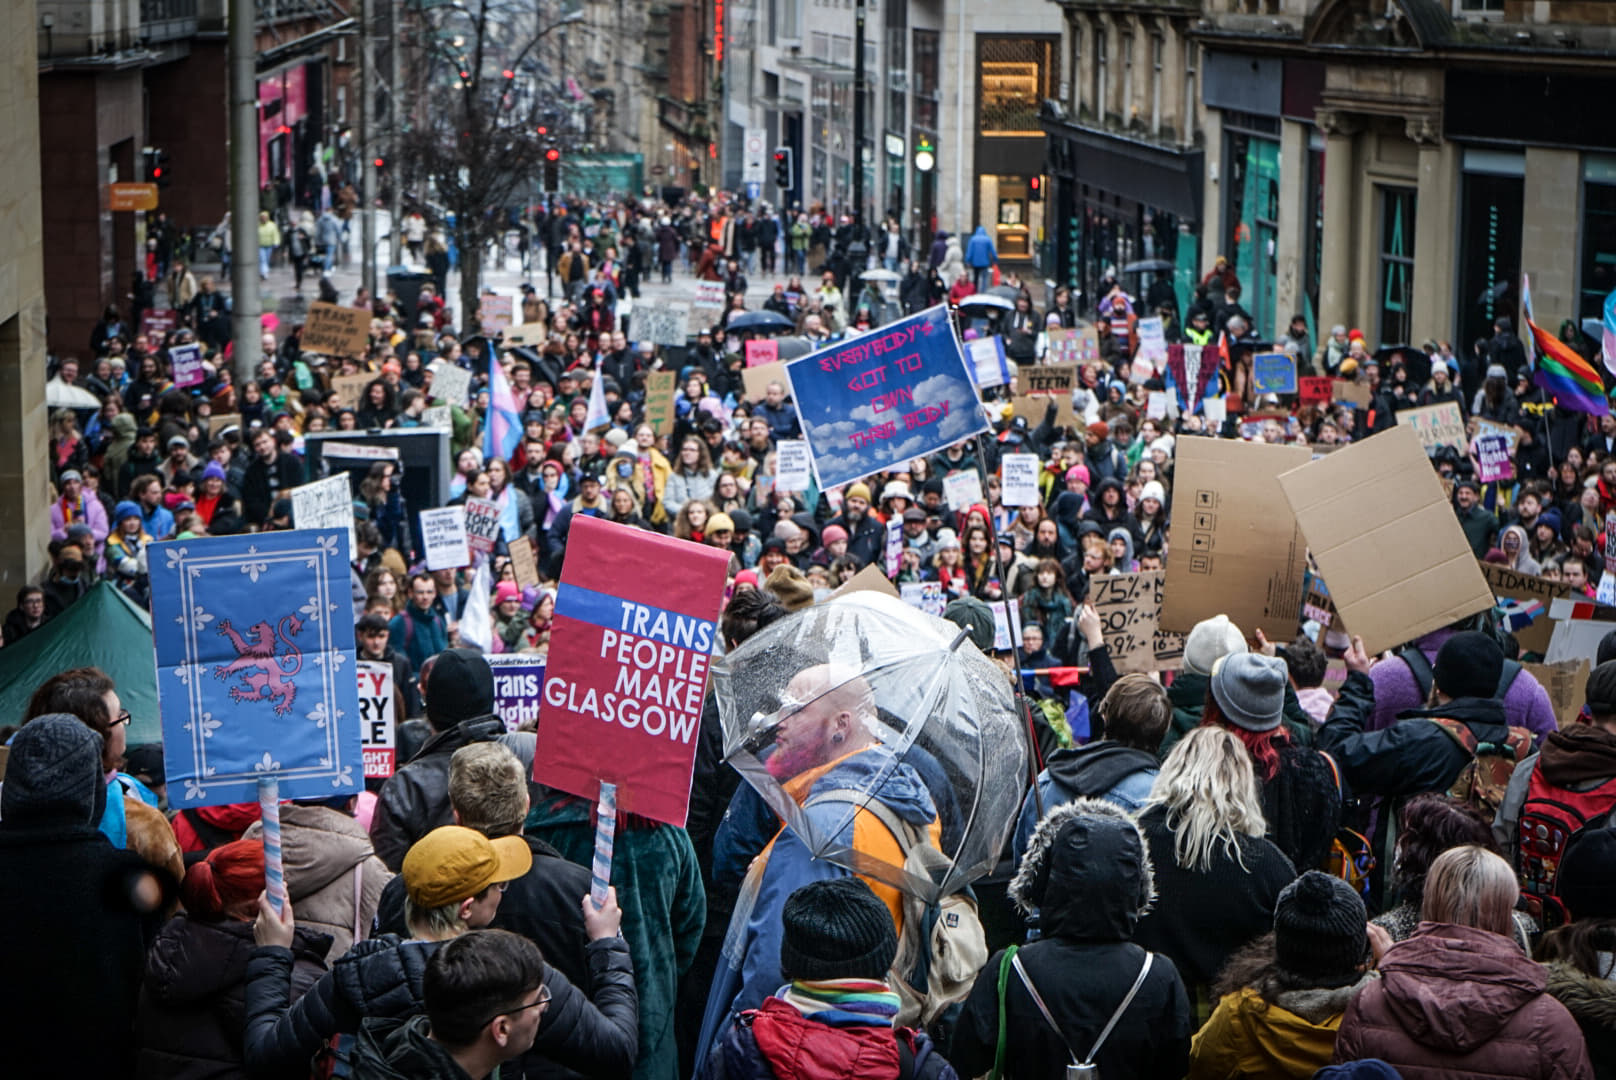 Activists and politicians spoke at the rally in Glasgow's city centre while those in the crowd held placards with slogans including 